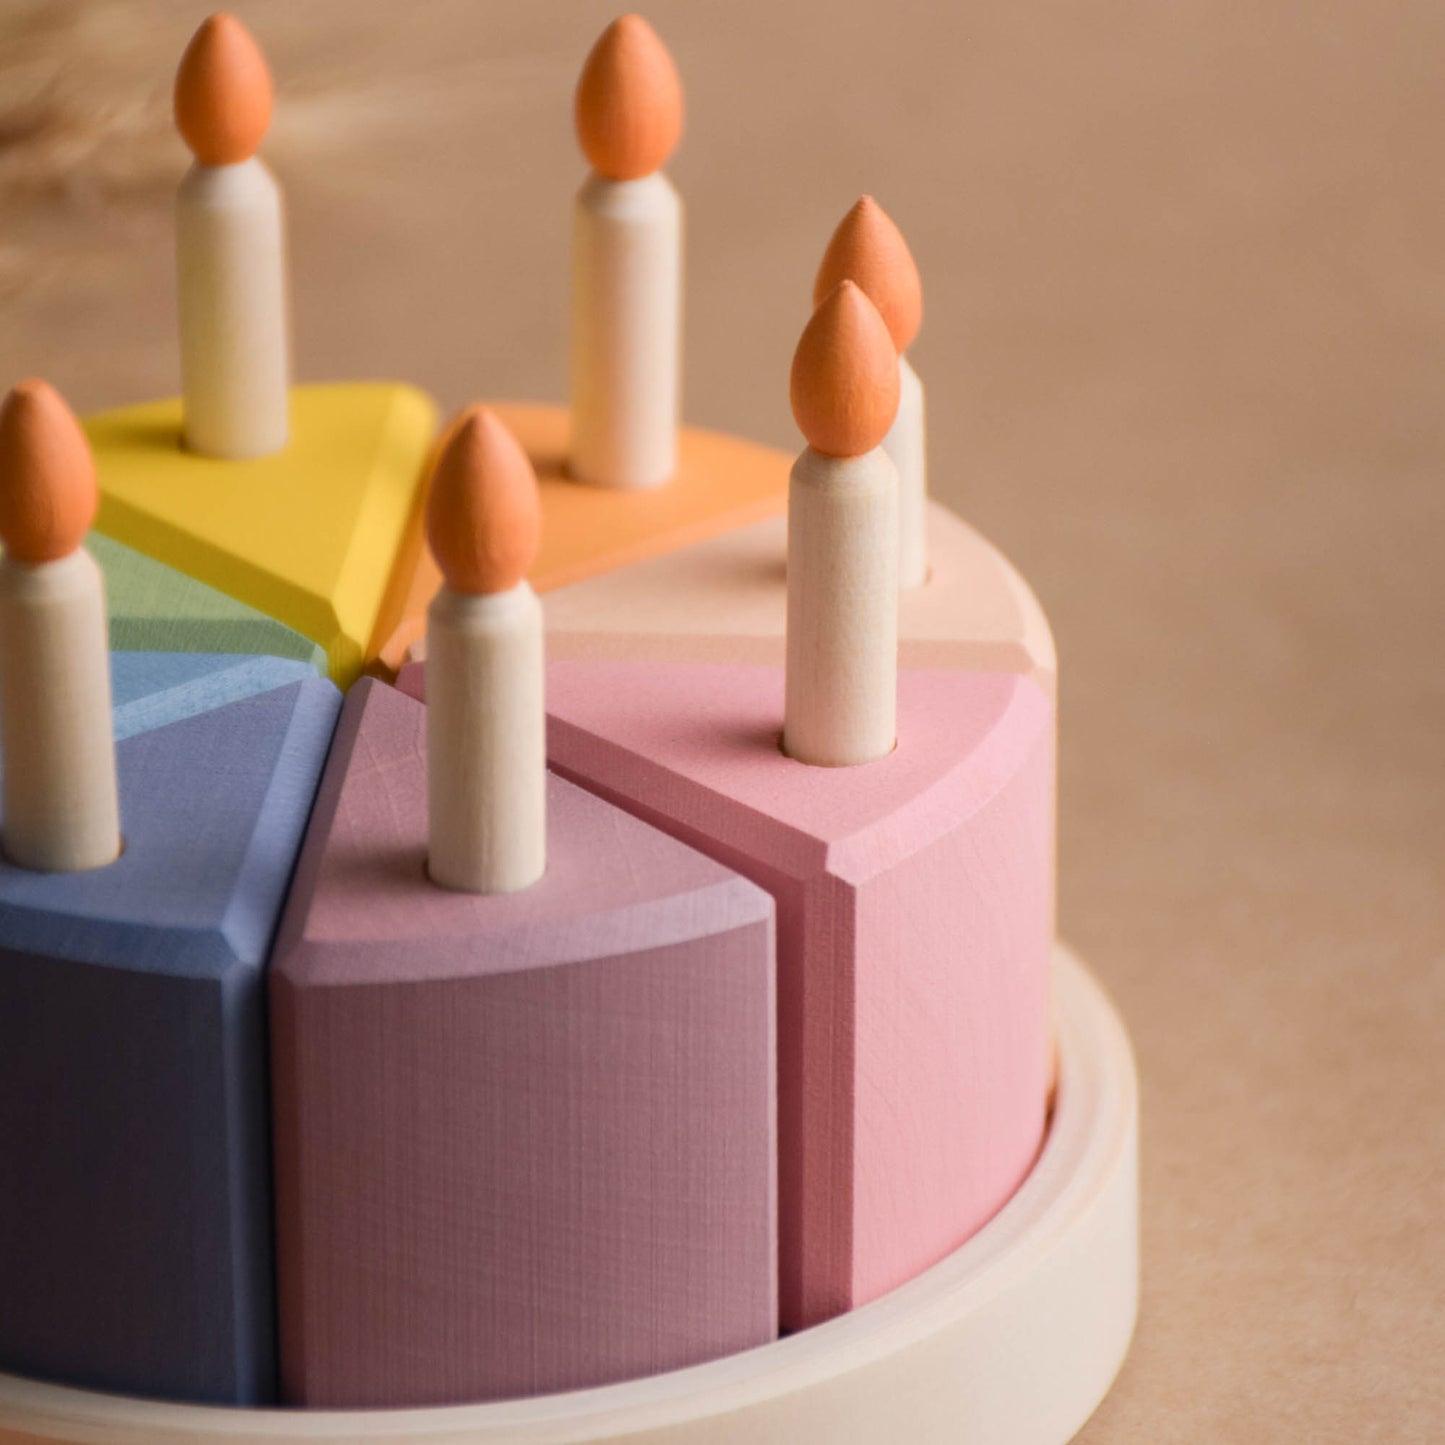 Birthday Cake with Candles